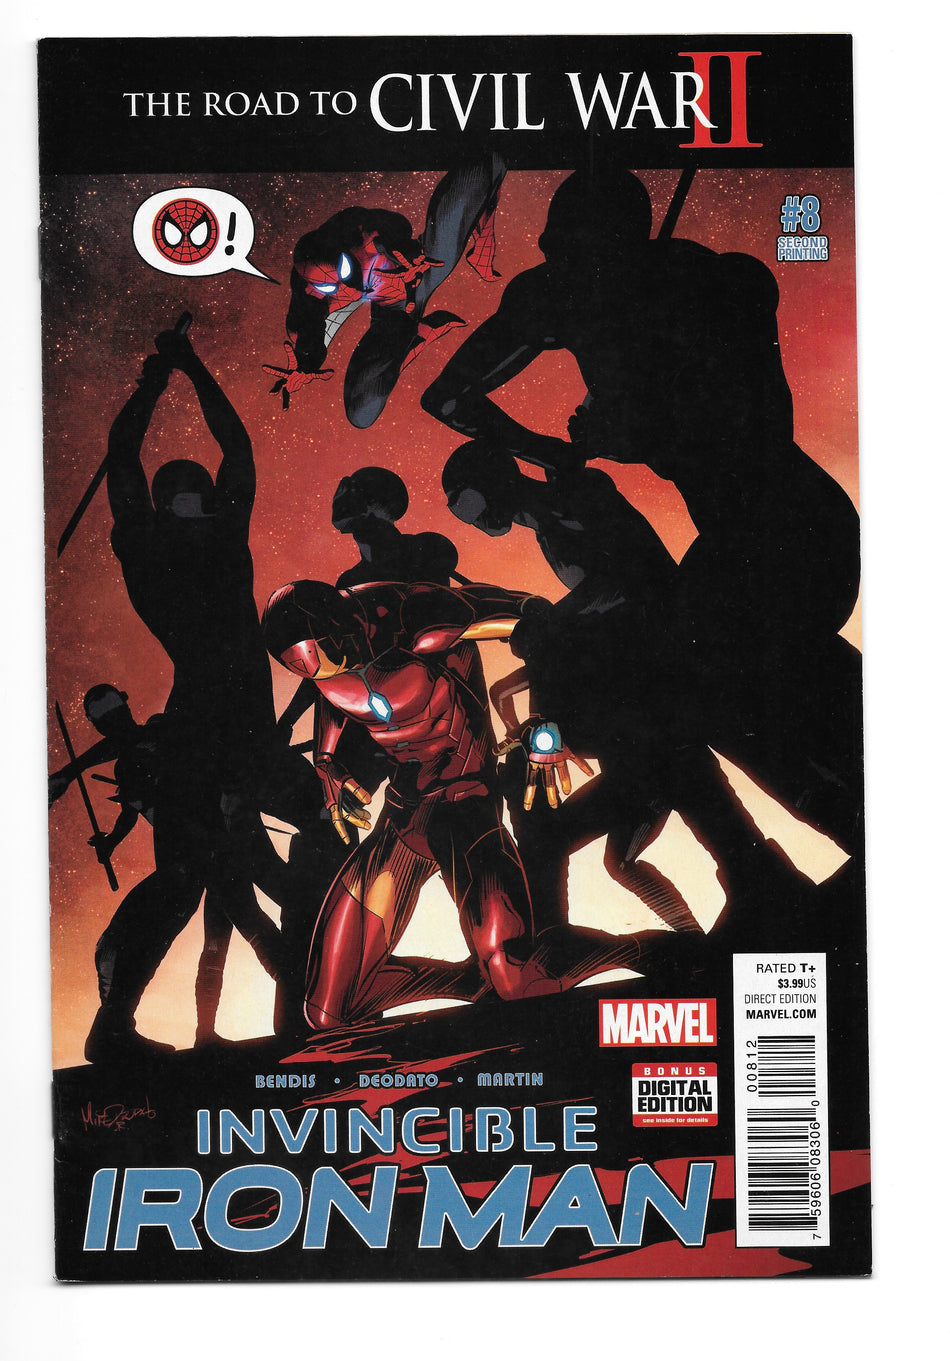 Photo of Invincible Iron Man Issue 8 Deodato 2nd Ptg Var comic sold by Stronghold Collectibles